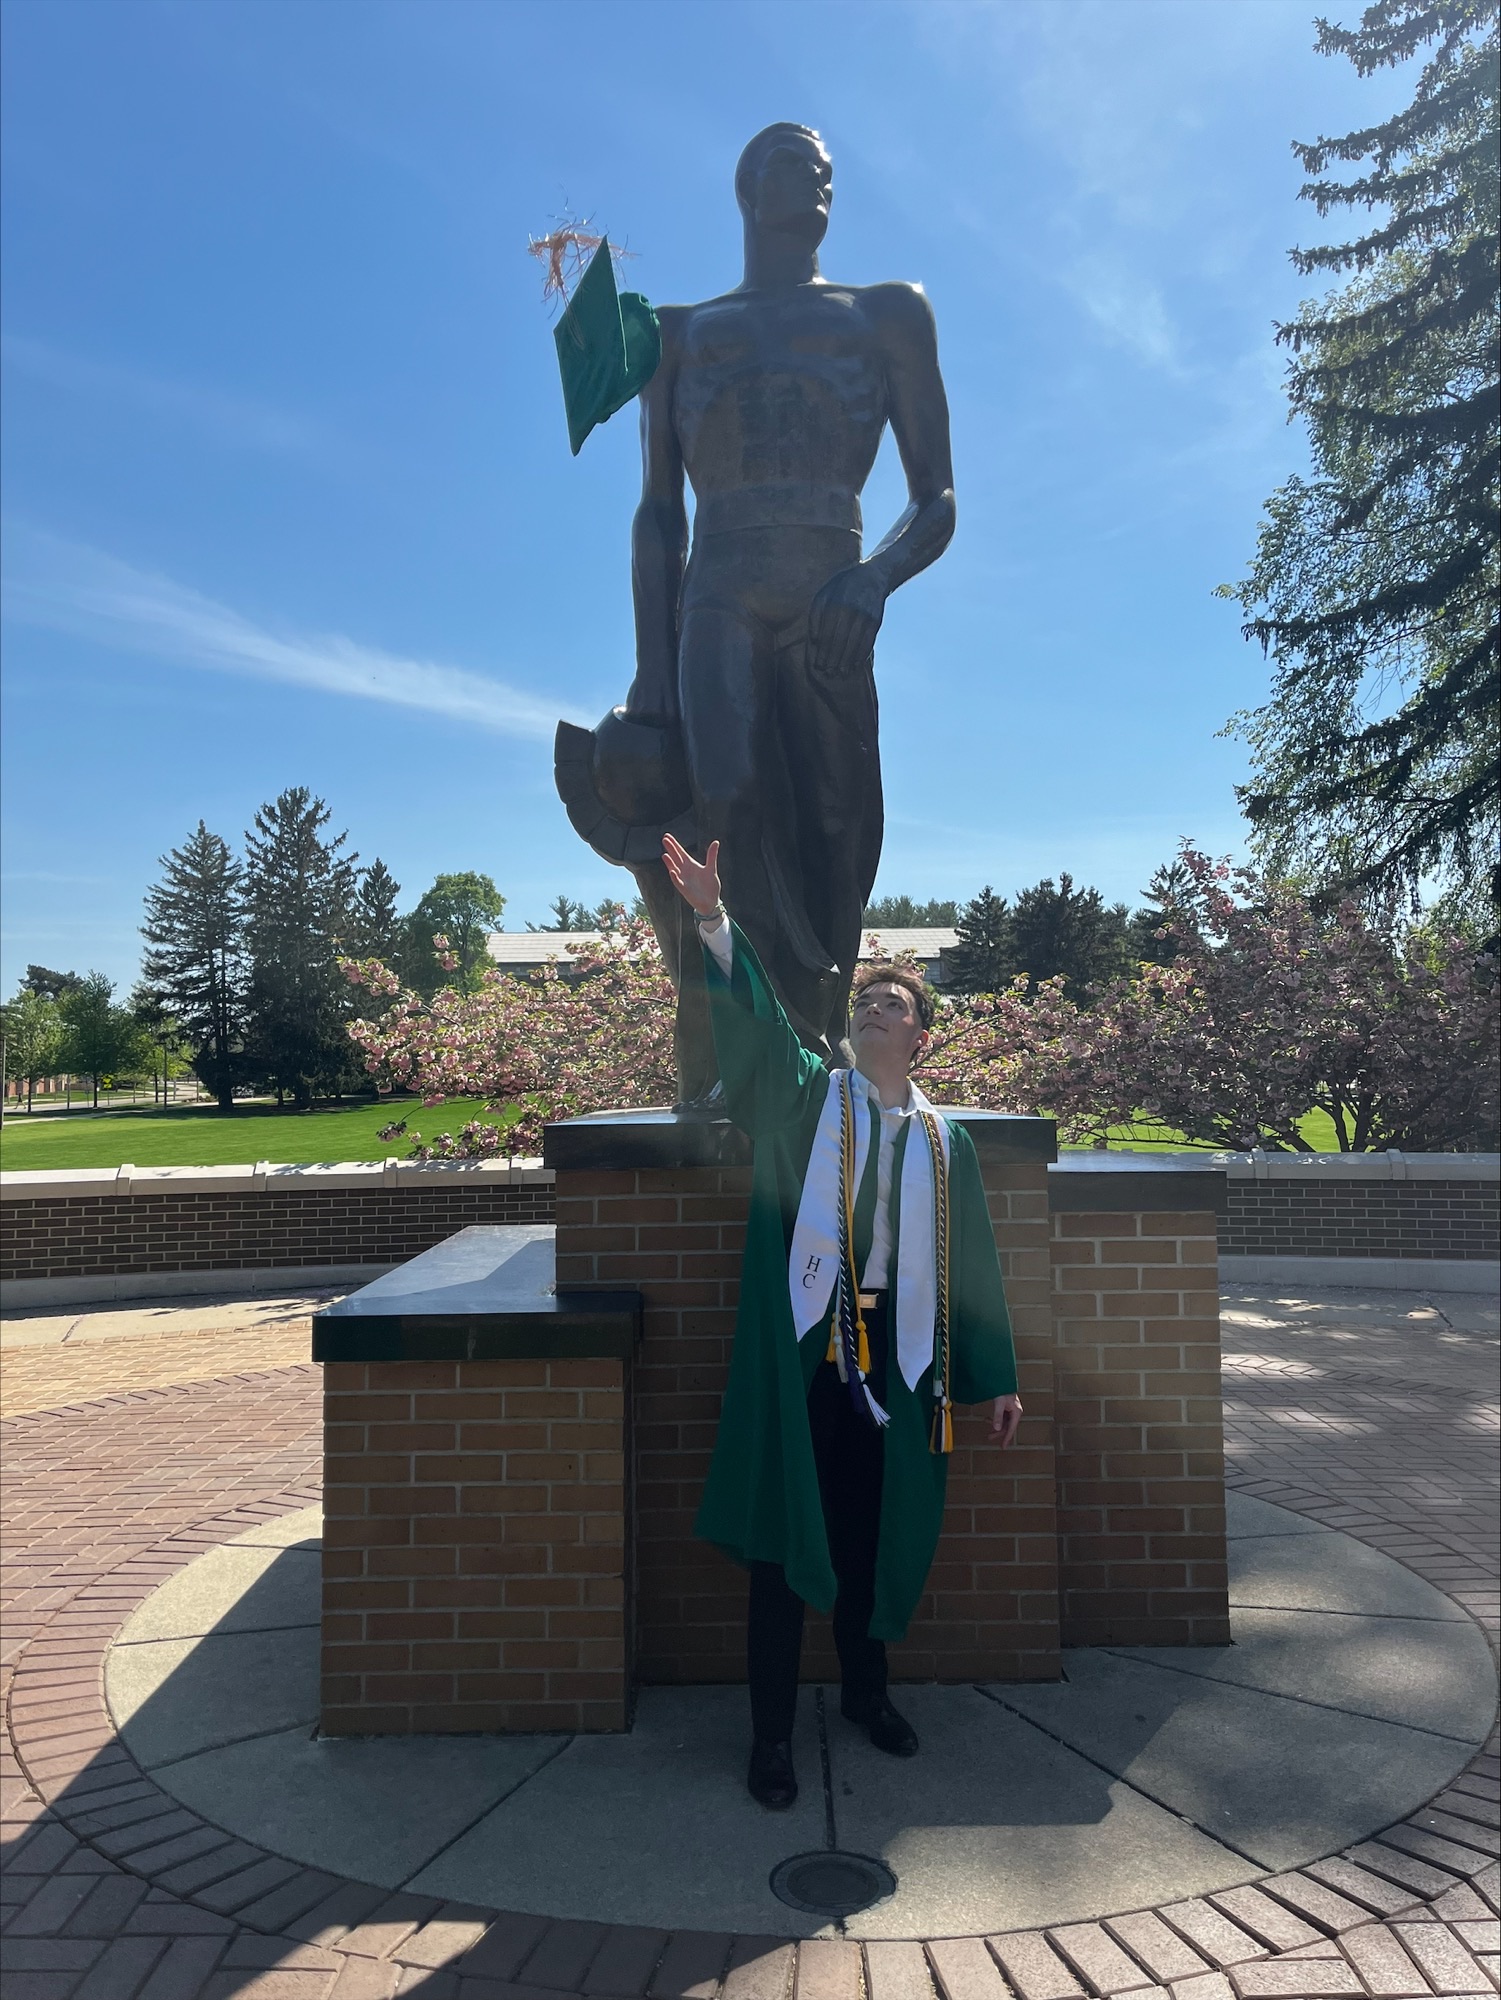 Carlos Conrad in his green graduation robe standing in front of The Spartan statue.